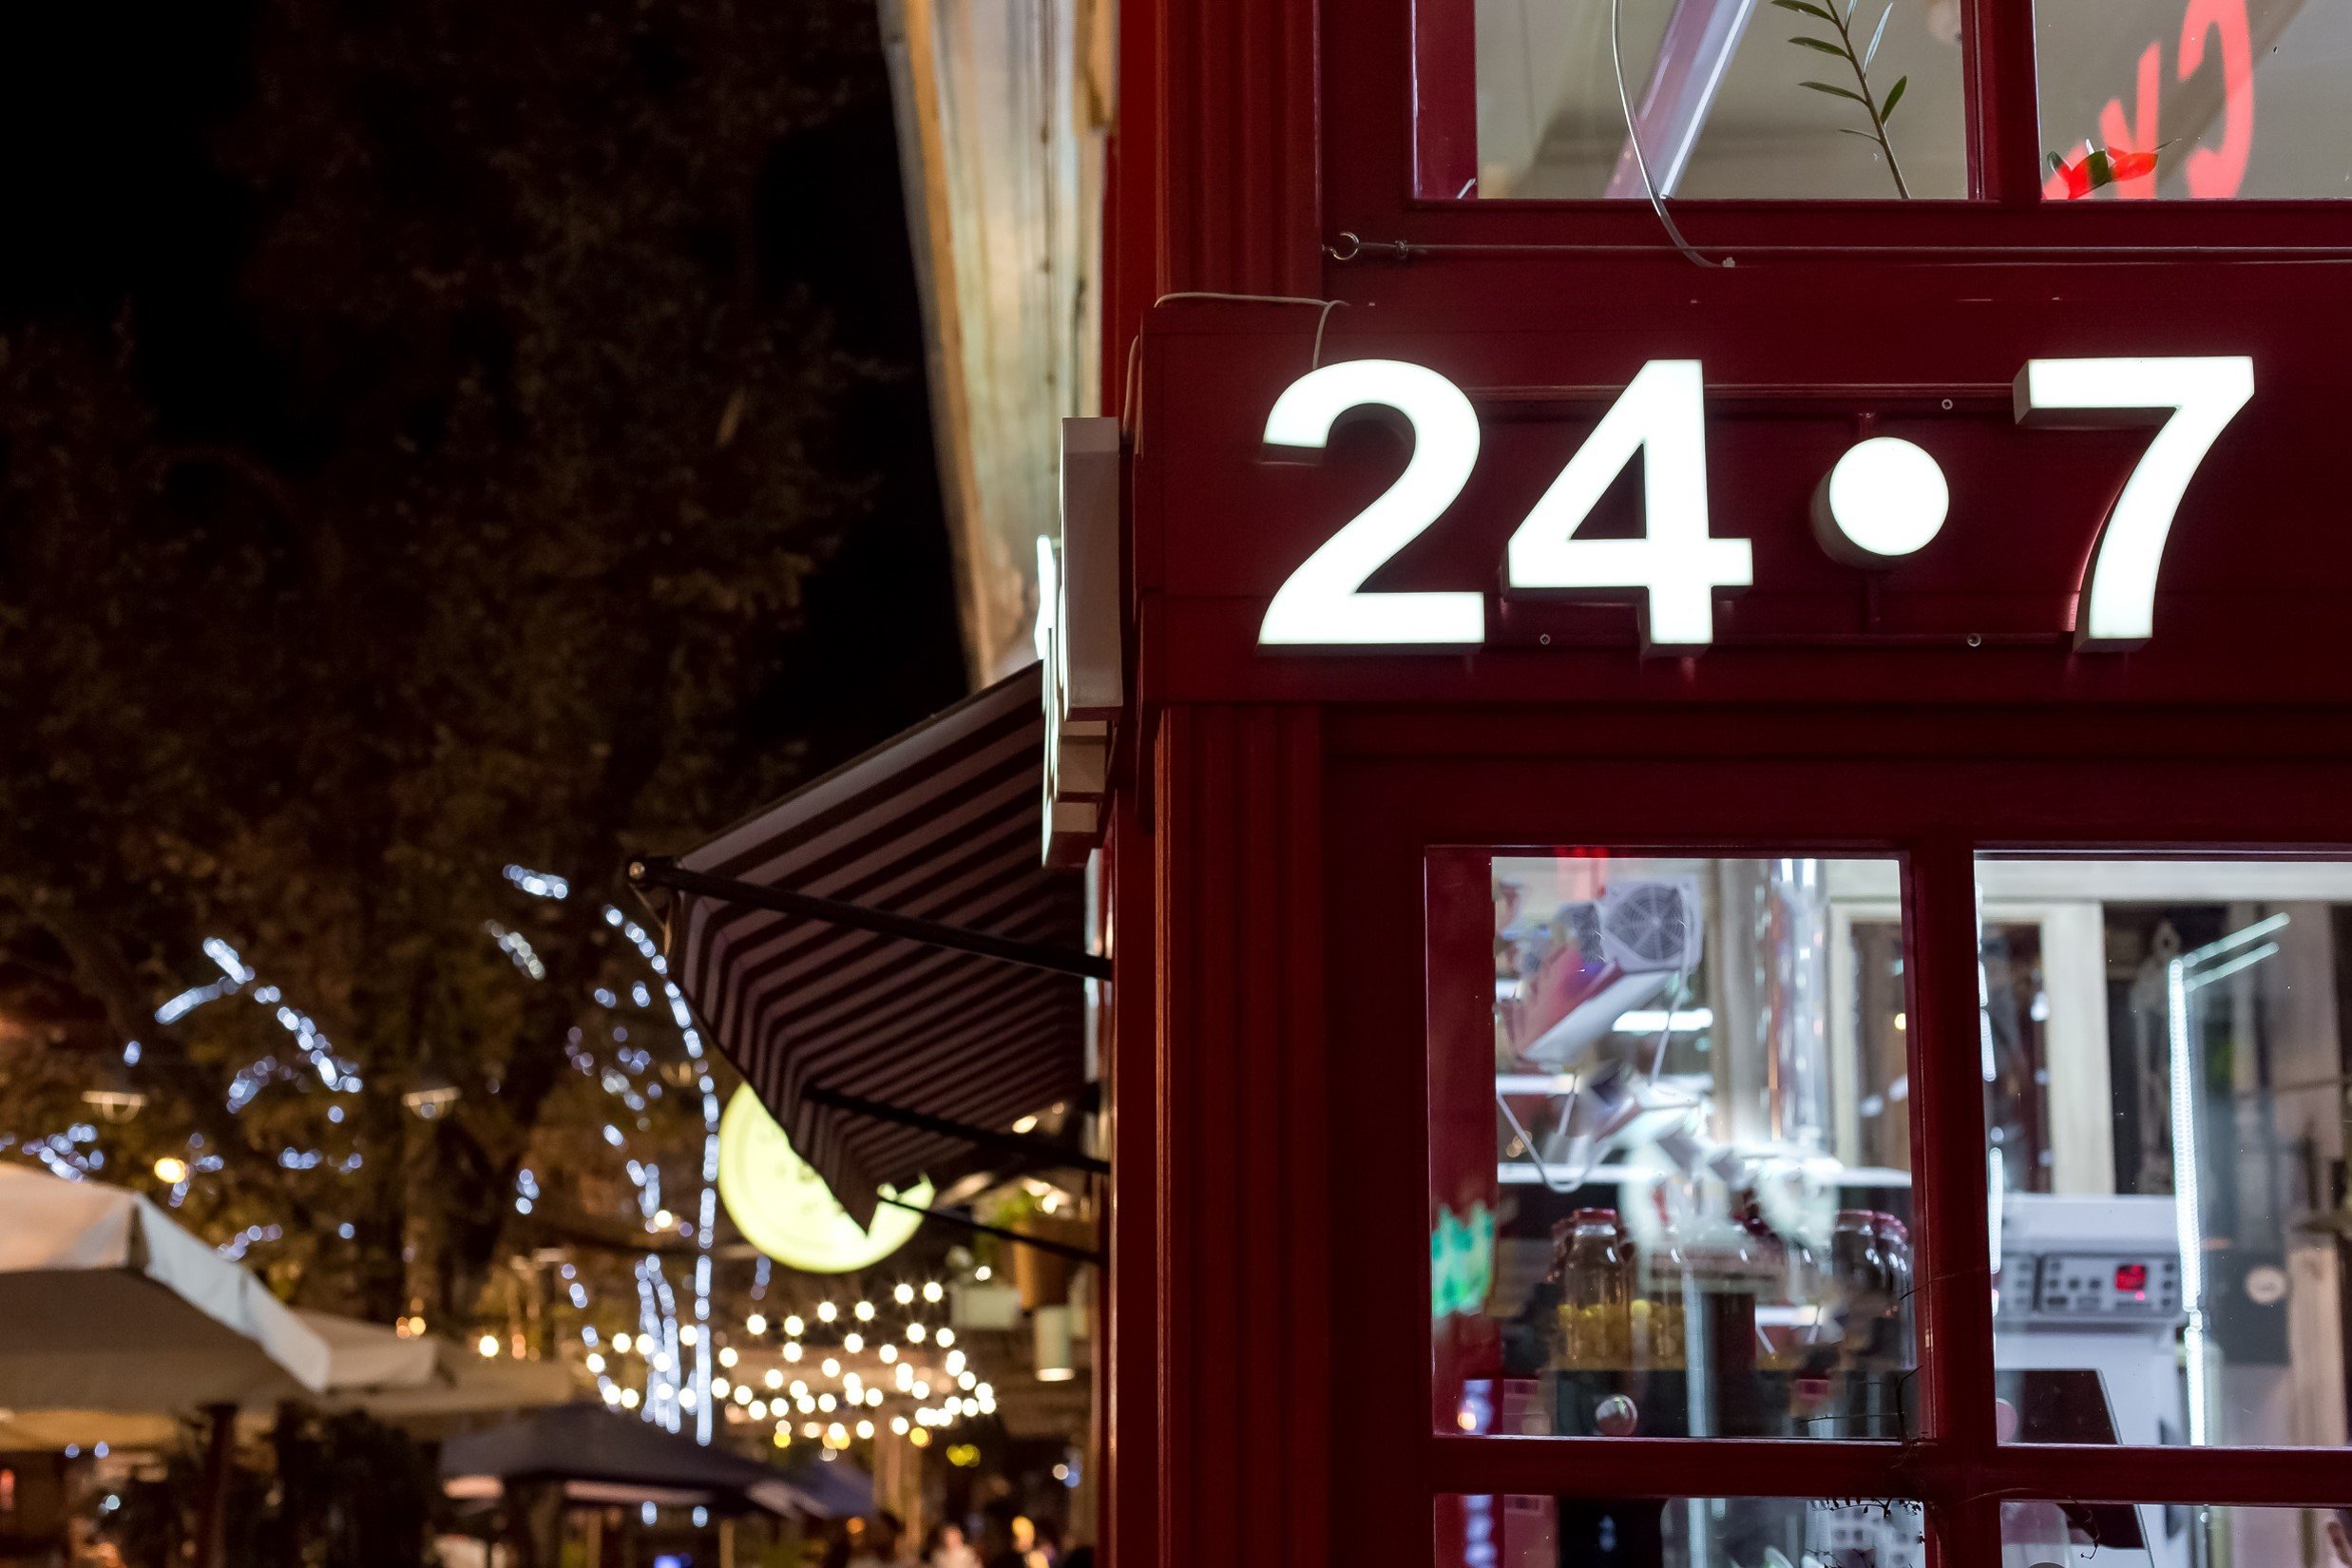 Your establishment is open 24/7, shouldn’t your data be 24/7 too?